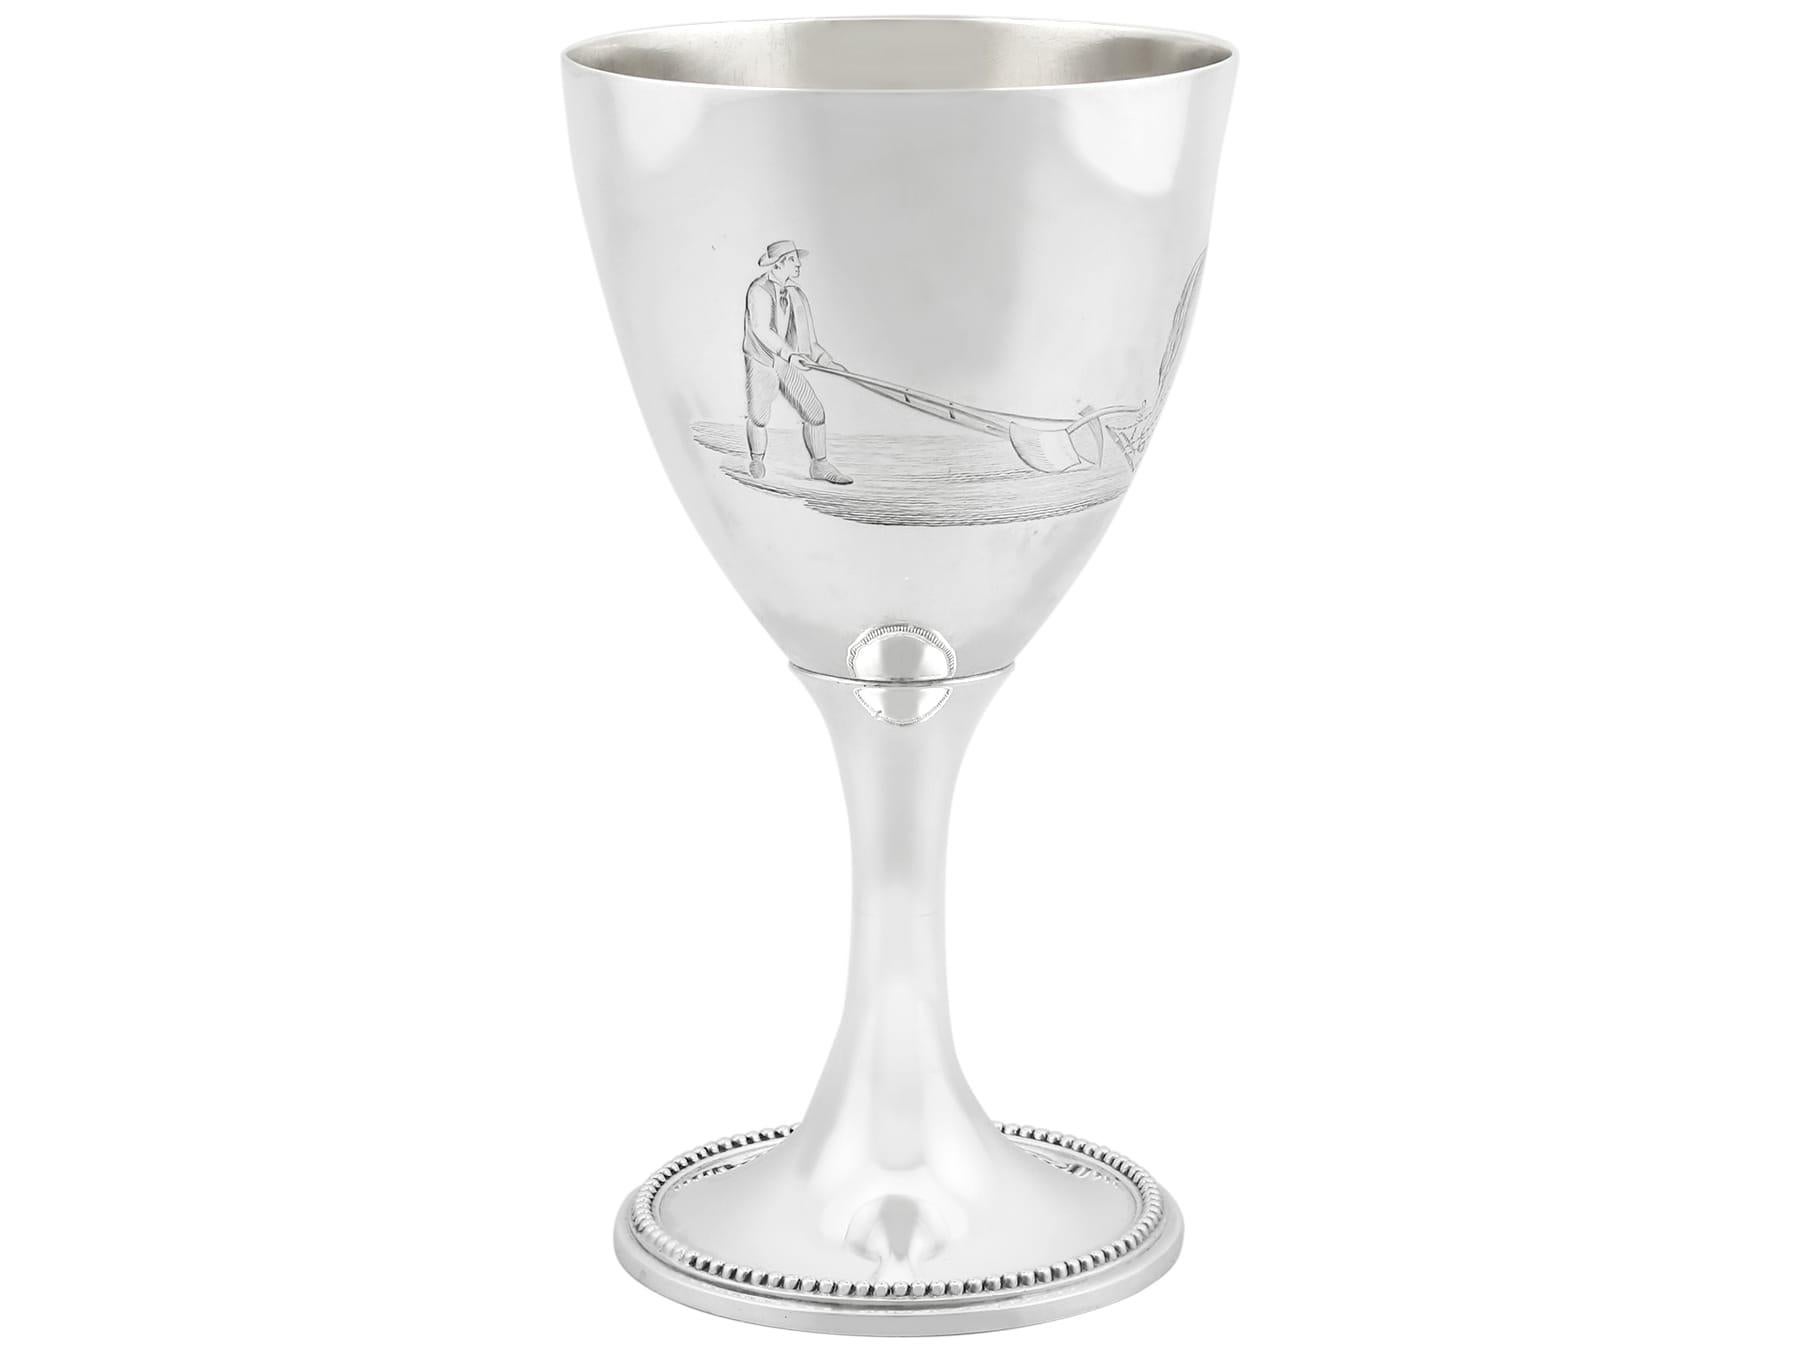 Victorian Agricultural Sterling Silver Goblet In Excellent Condition For Sale In Jesmond, Newcastle Upon Tyne